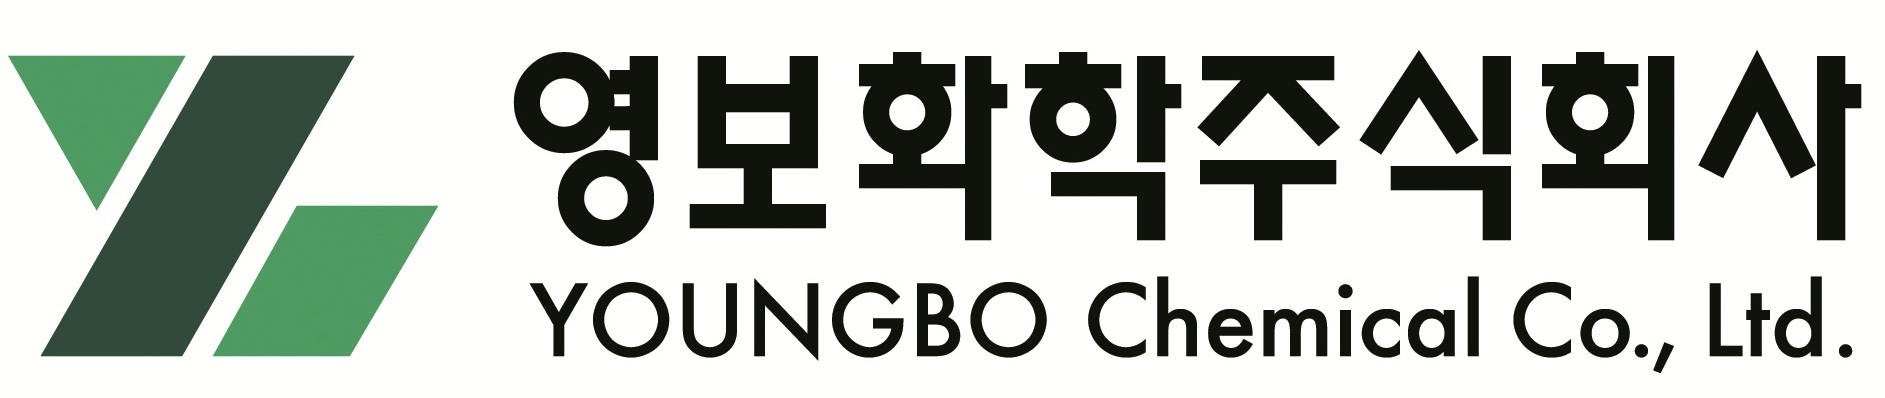 YOUNGBO CHEMICAL CO., LTD.